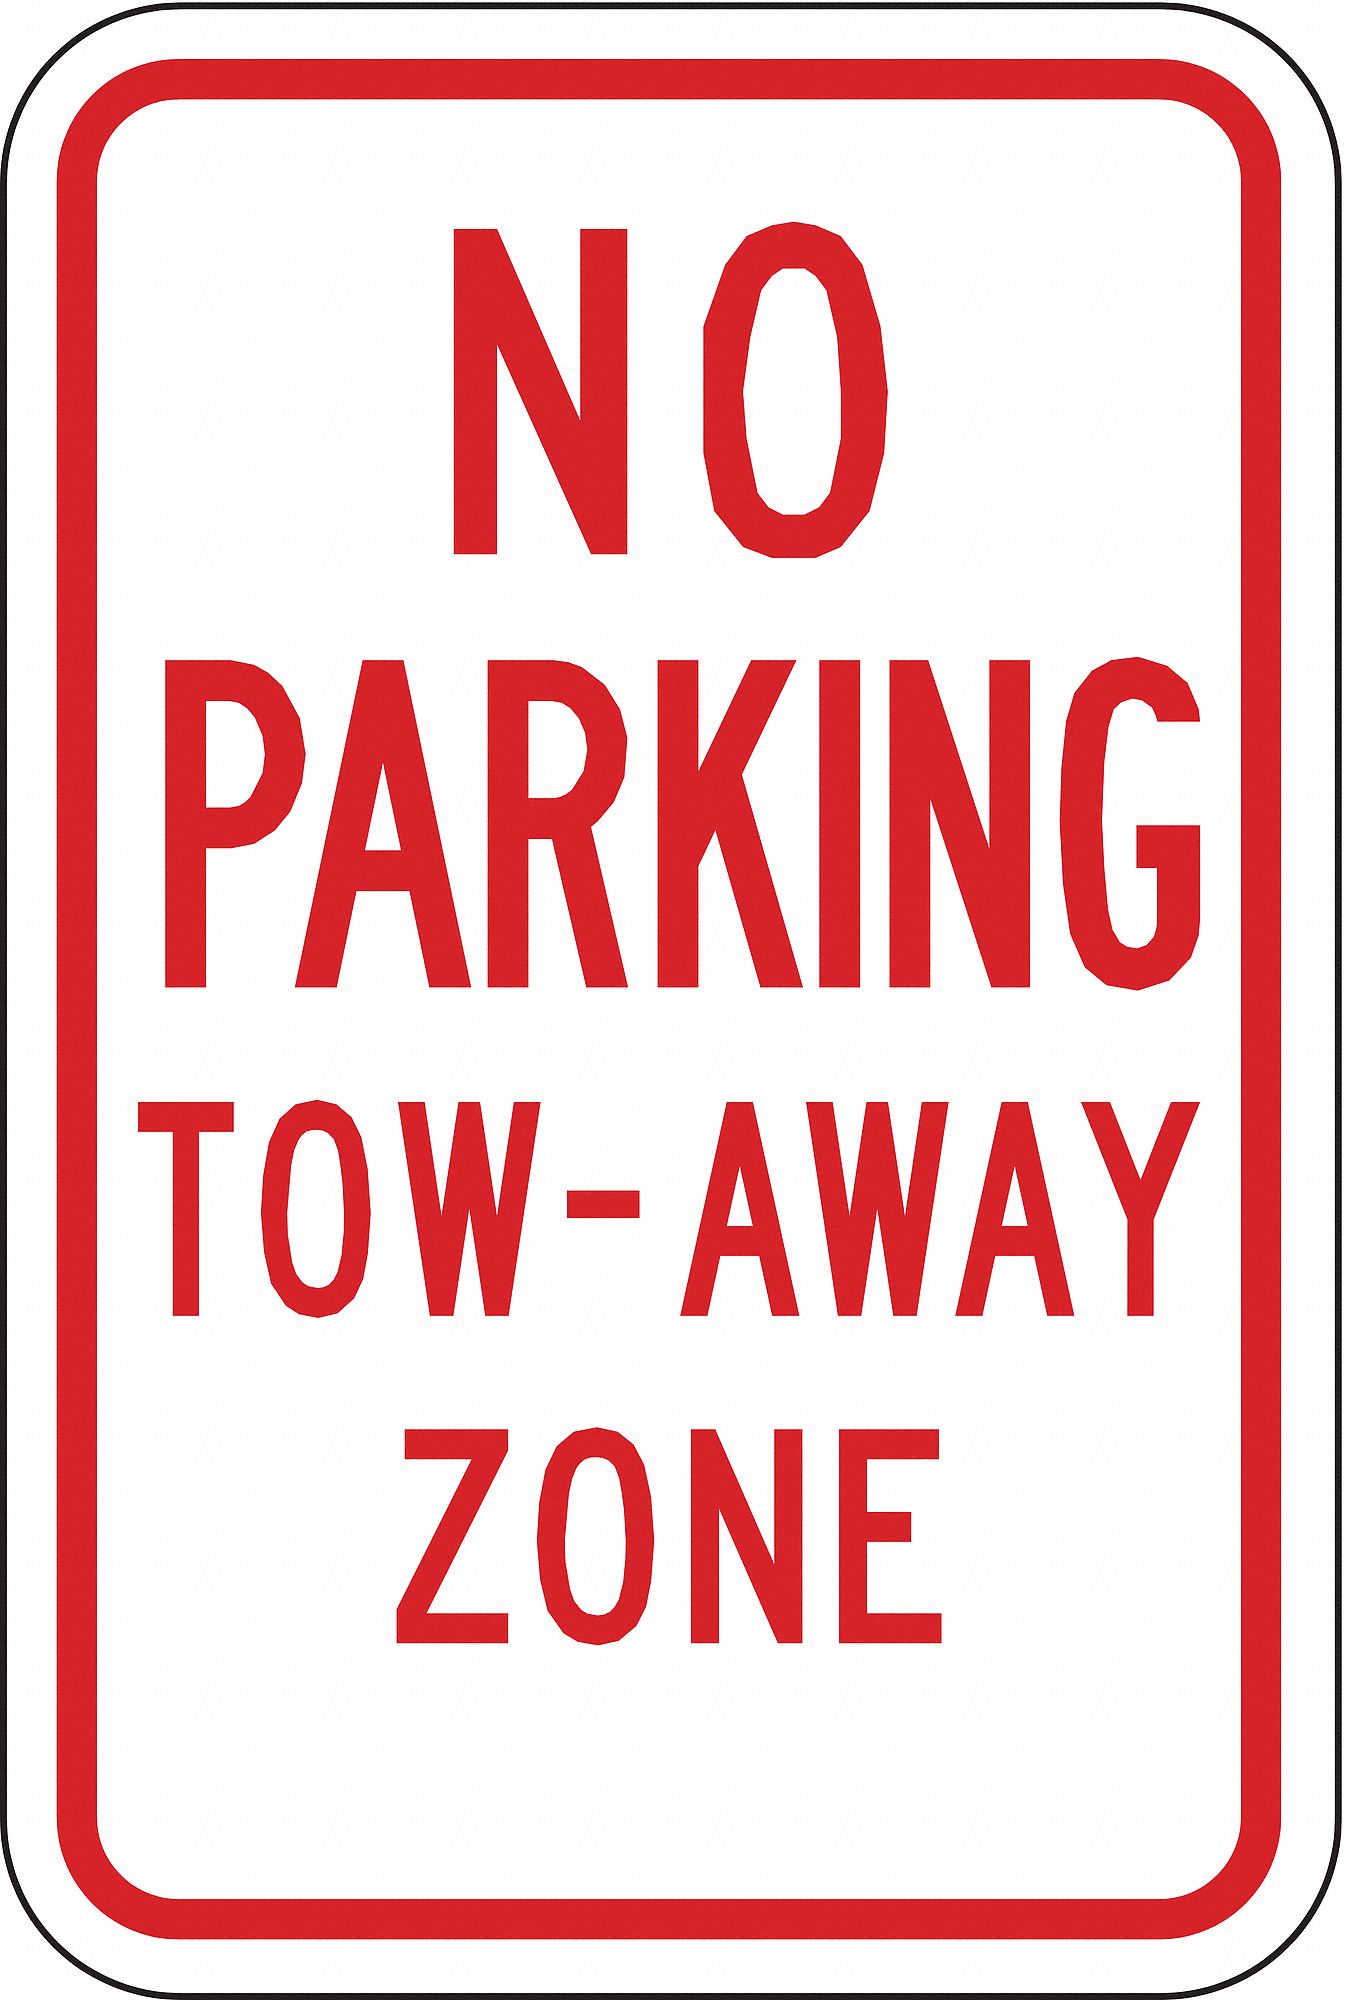 Lyle Tow Zone No Parking Sign Sign Legend No Parking Tow Away Zone 18 In X 12 In 3pmj2 Np 038 12ha Grainger